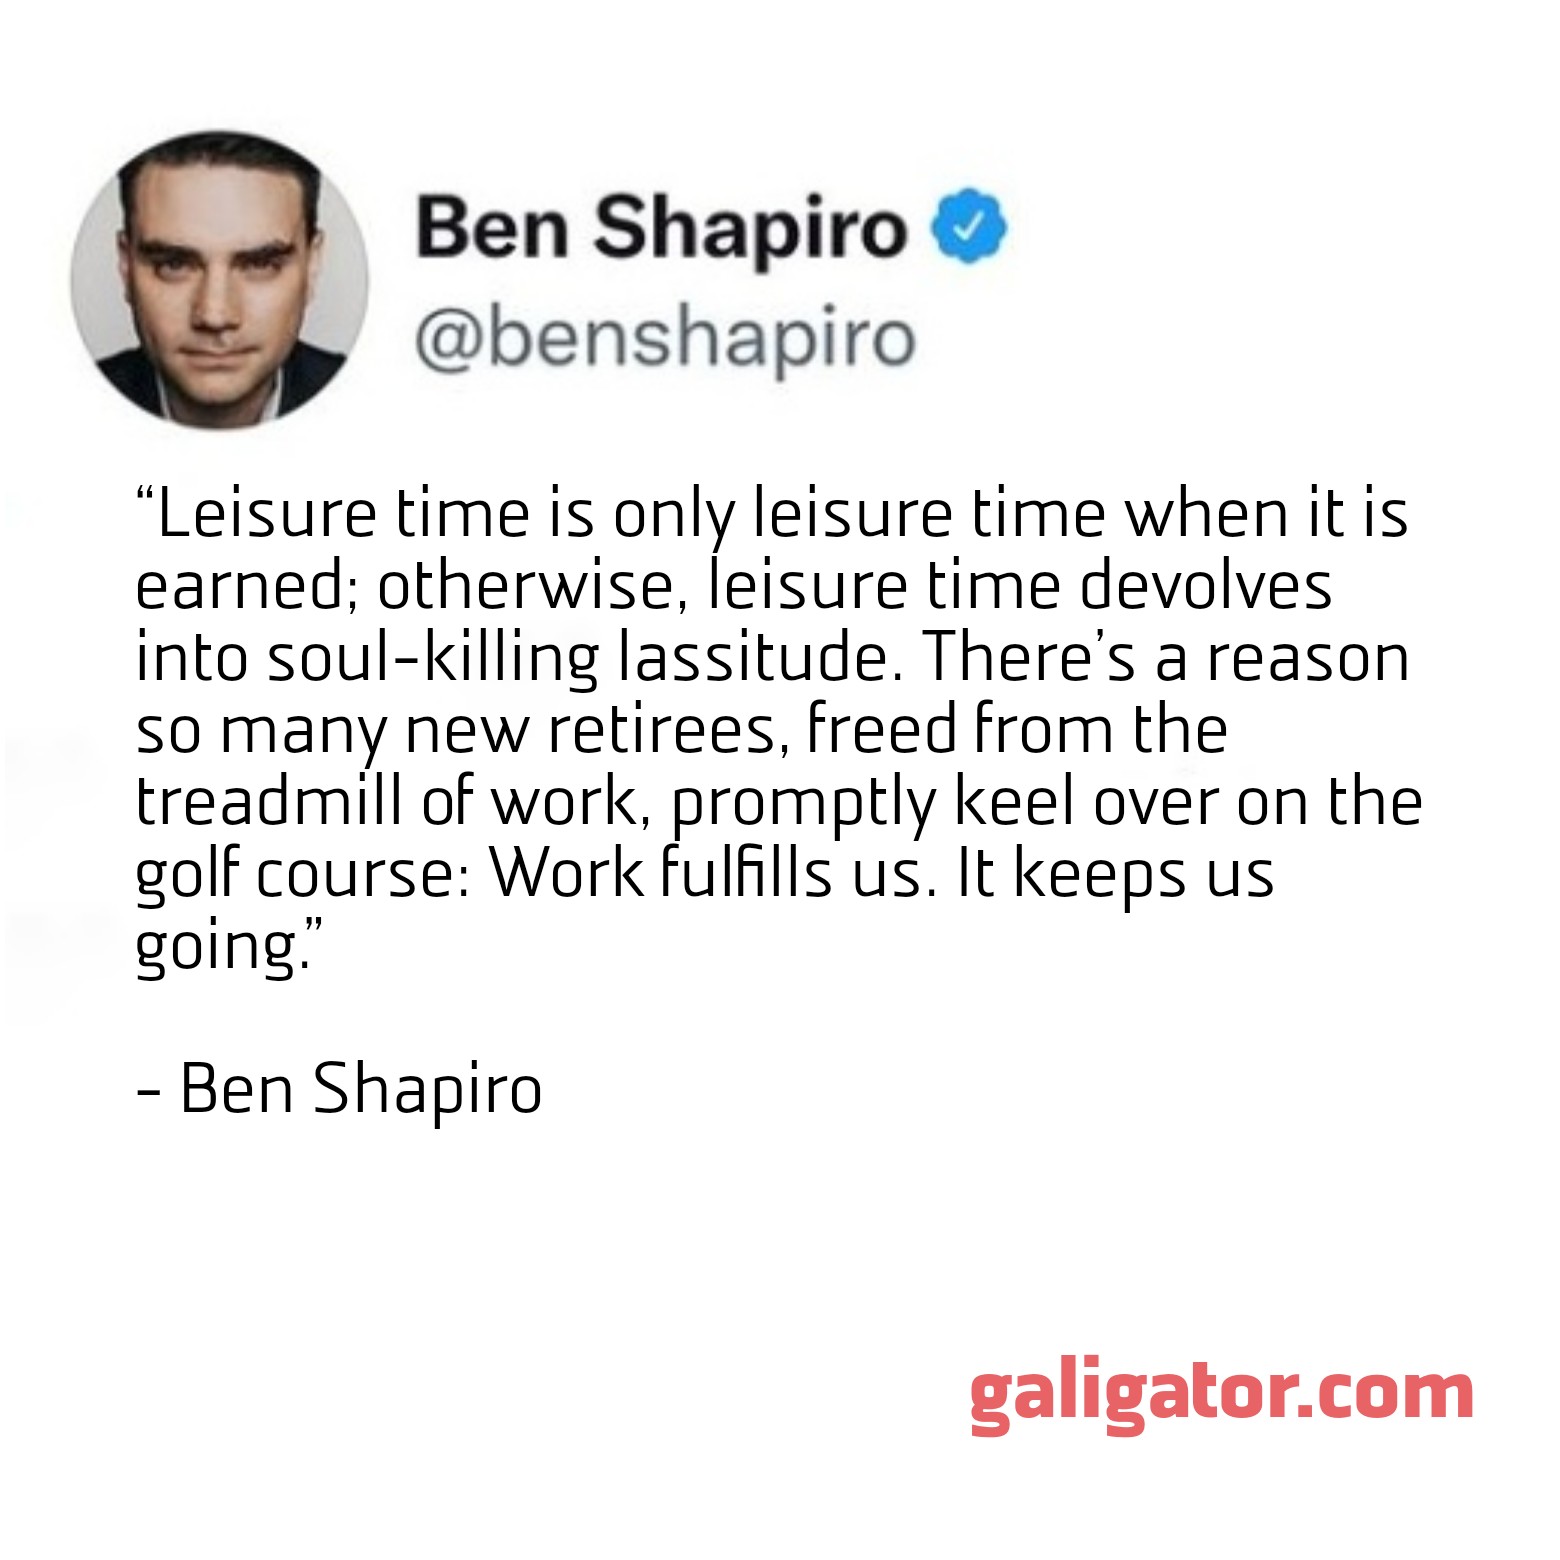 ben shapiro quotes, ben shapiro wife quotes, ben shapiro quote, ben shapiro quotes on abortion, dumbest ben shapiro quotes, ben shaprio quotes, ben shapiro quote, ben shapiro quotes funny, dumbest ben shapiro quotes, ben shapiro comments, ben shapiro quotes funny , ben shapiro gun control quotes, quotes by ben shapiro, ben shapiro best quotes, ben shapiro capitalism quotes , is ben shapiro autistic, young ben shapiro sword real, ben shapiro this is savvy , ben shapiro hypothetical , ben shapiro sword picture,